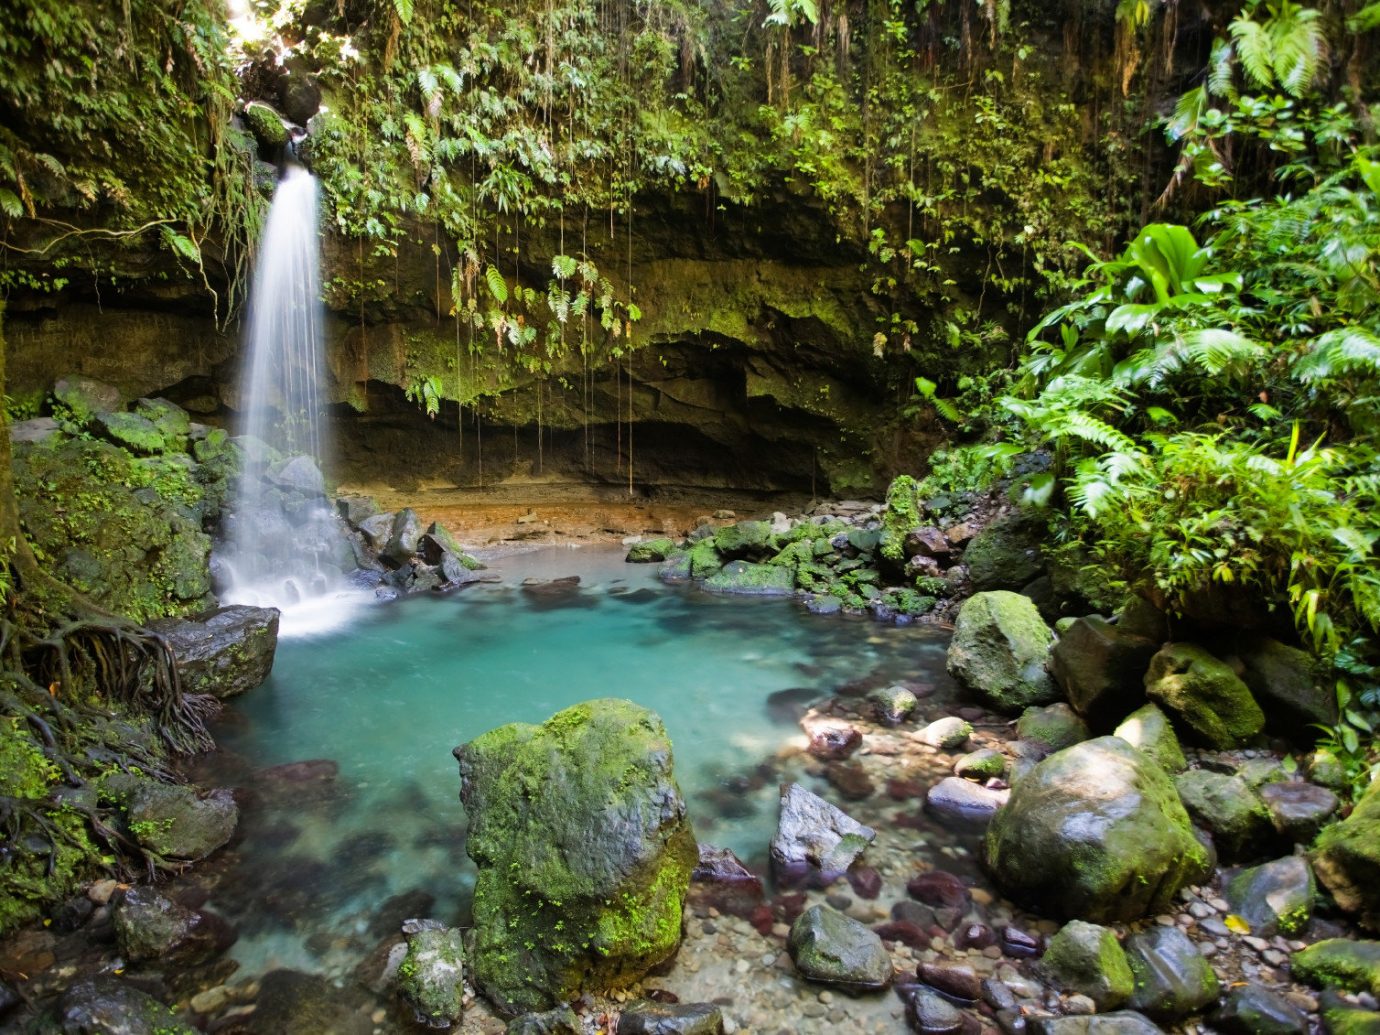 Health + Wellness Trip Ideas outdoor habitat Nature Waterfall water vegetation body of water green watercourse stream rock botany rainforest water feature Forest River Jungle woodland old growth forest area surrounded